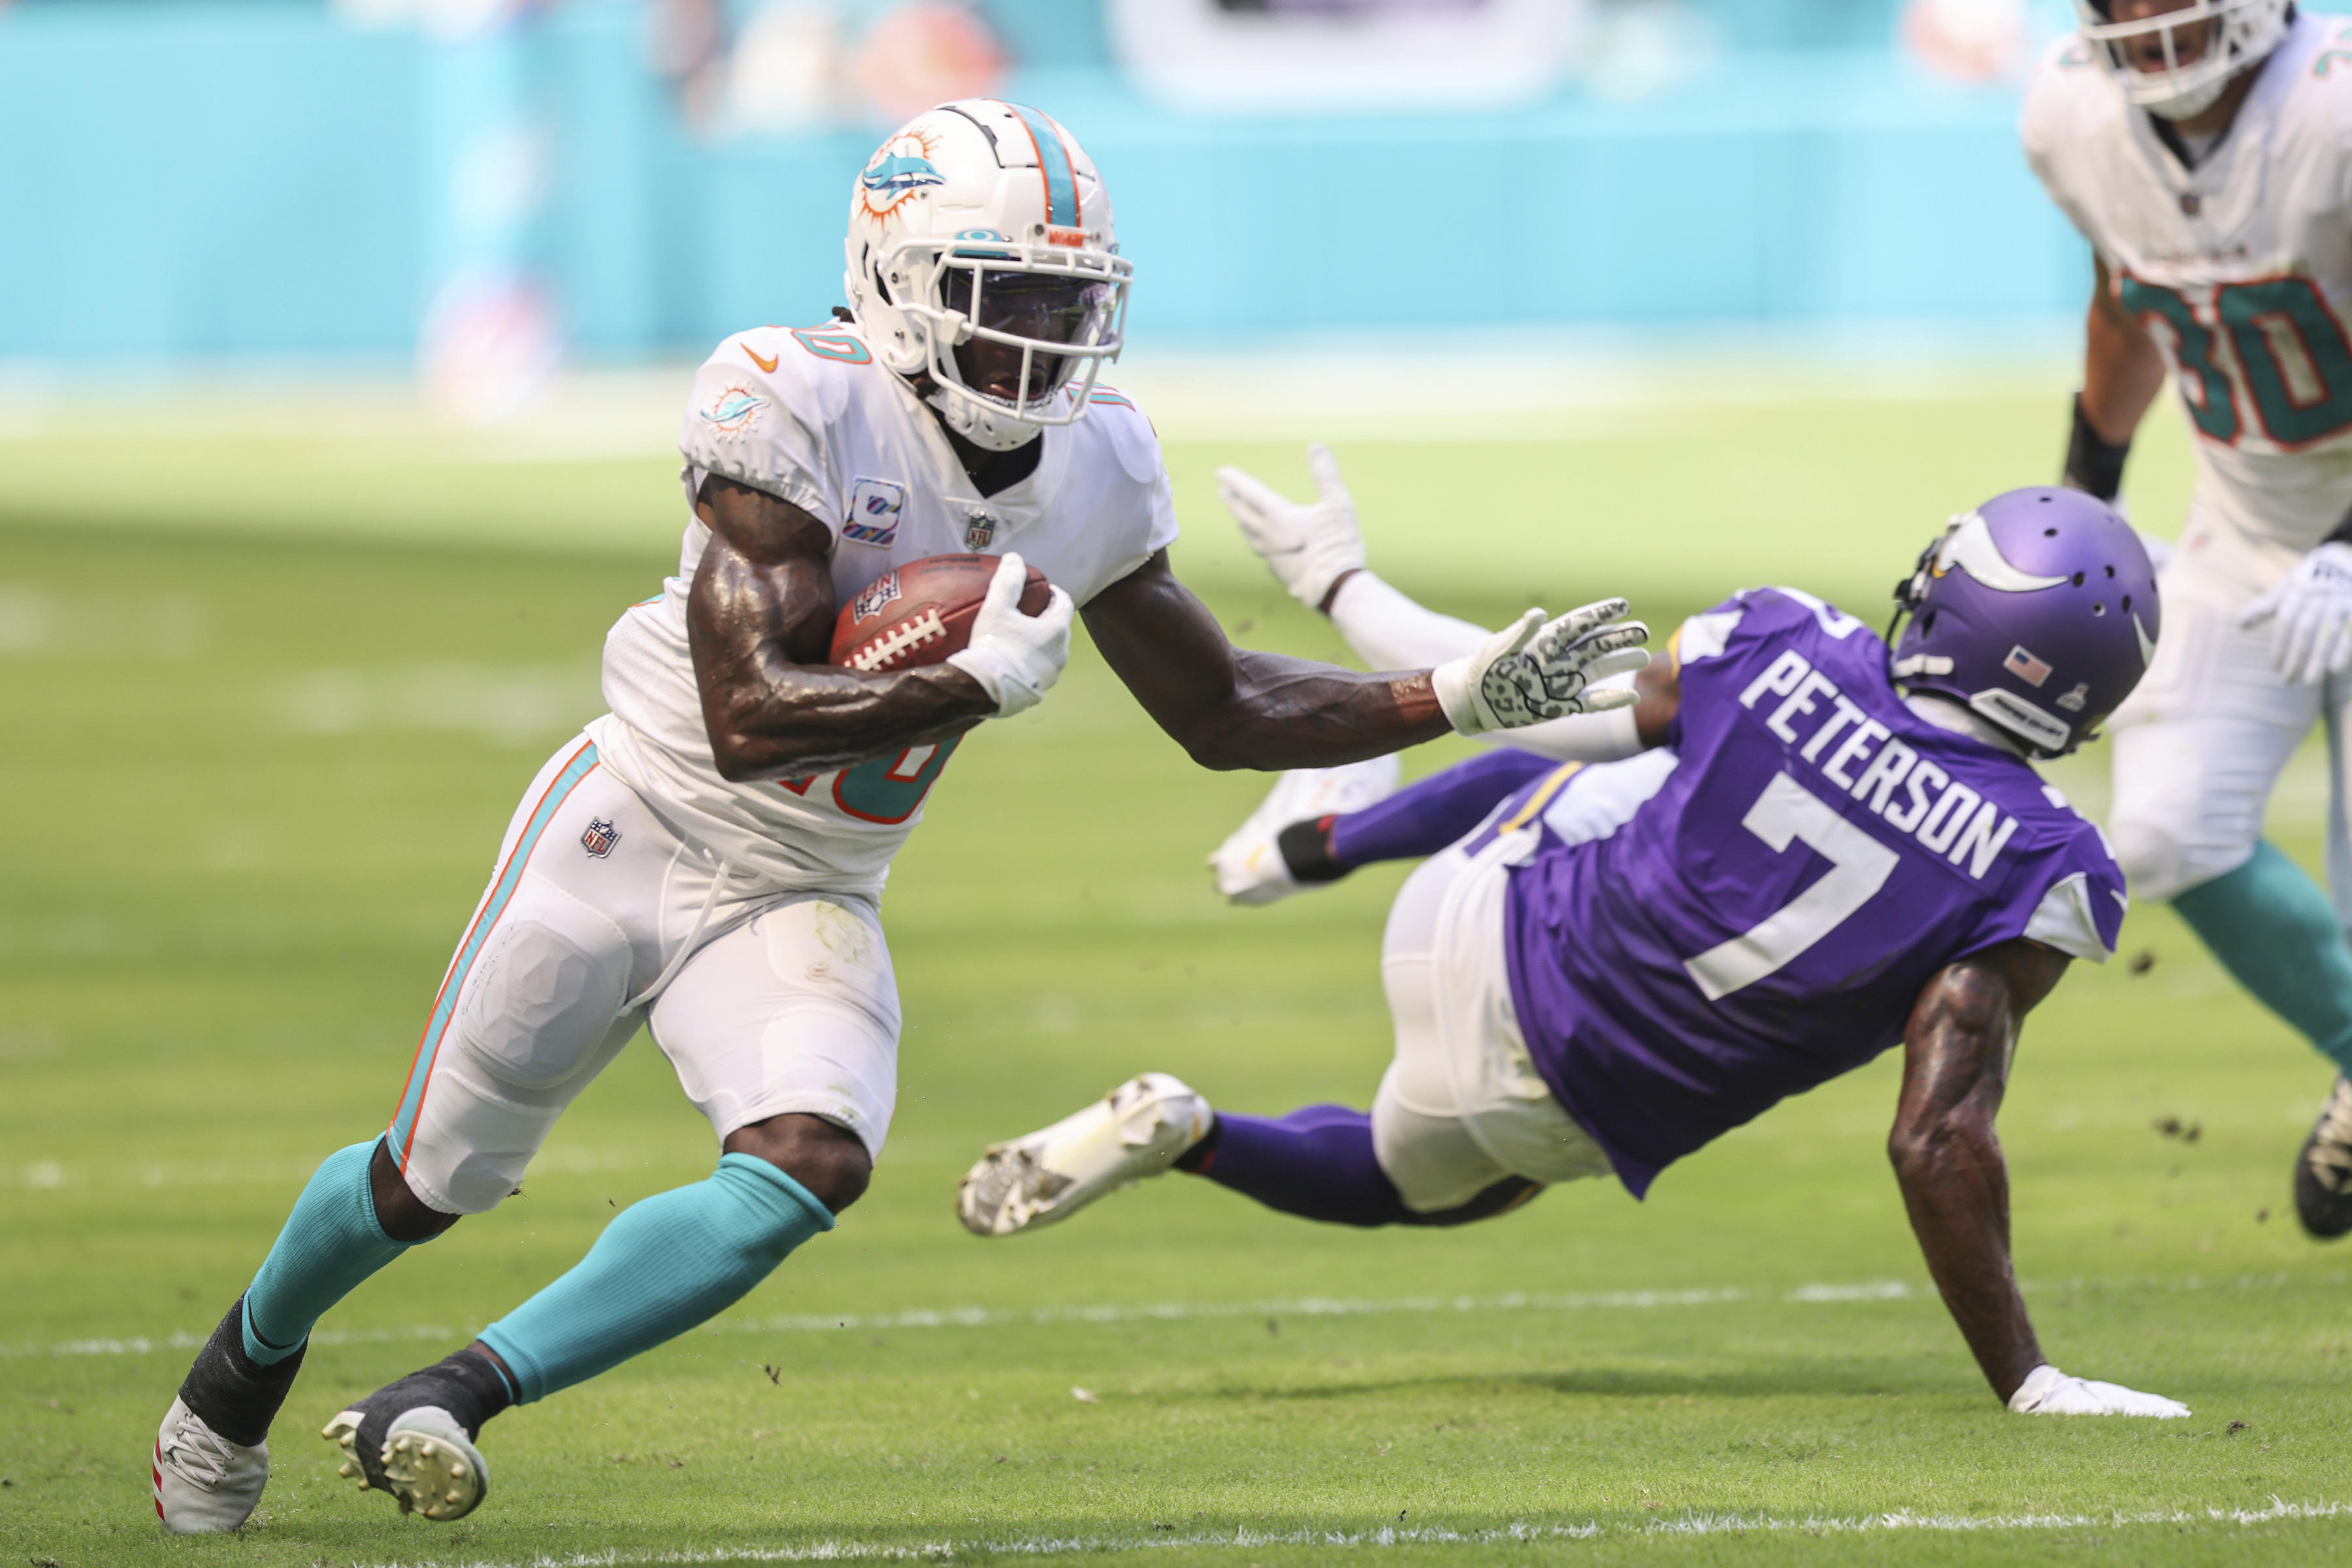 Dolphins hold off Steelers for 1st 'Sunday Night Football' win